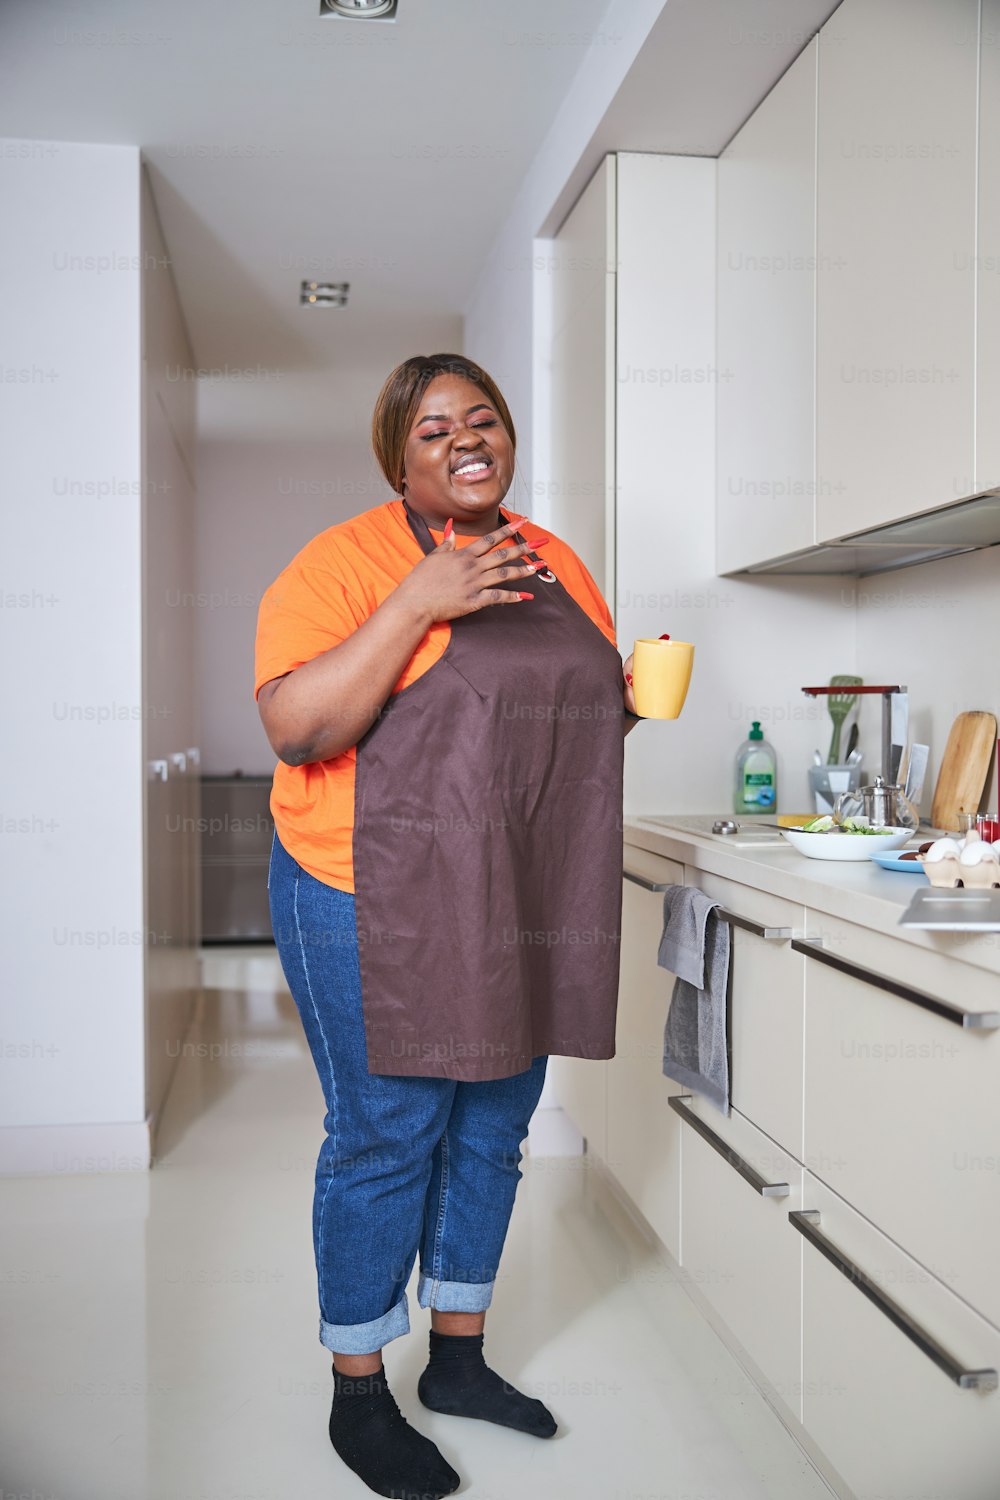 Merry Afro-American lady smiling while wearing apron and enjoying cup of coffee in her kitchen